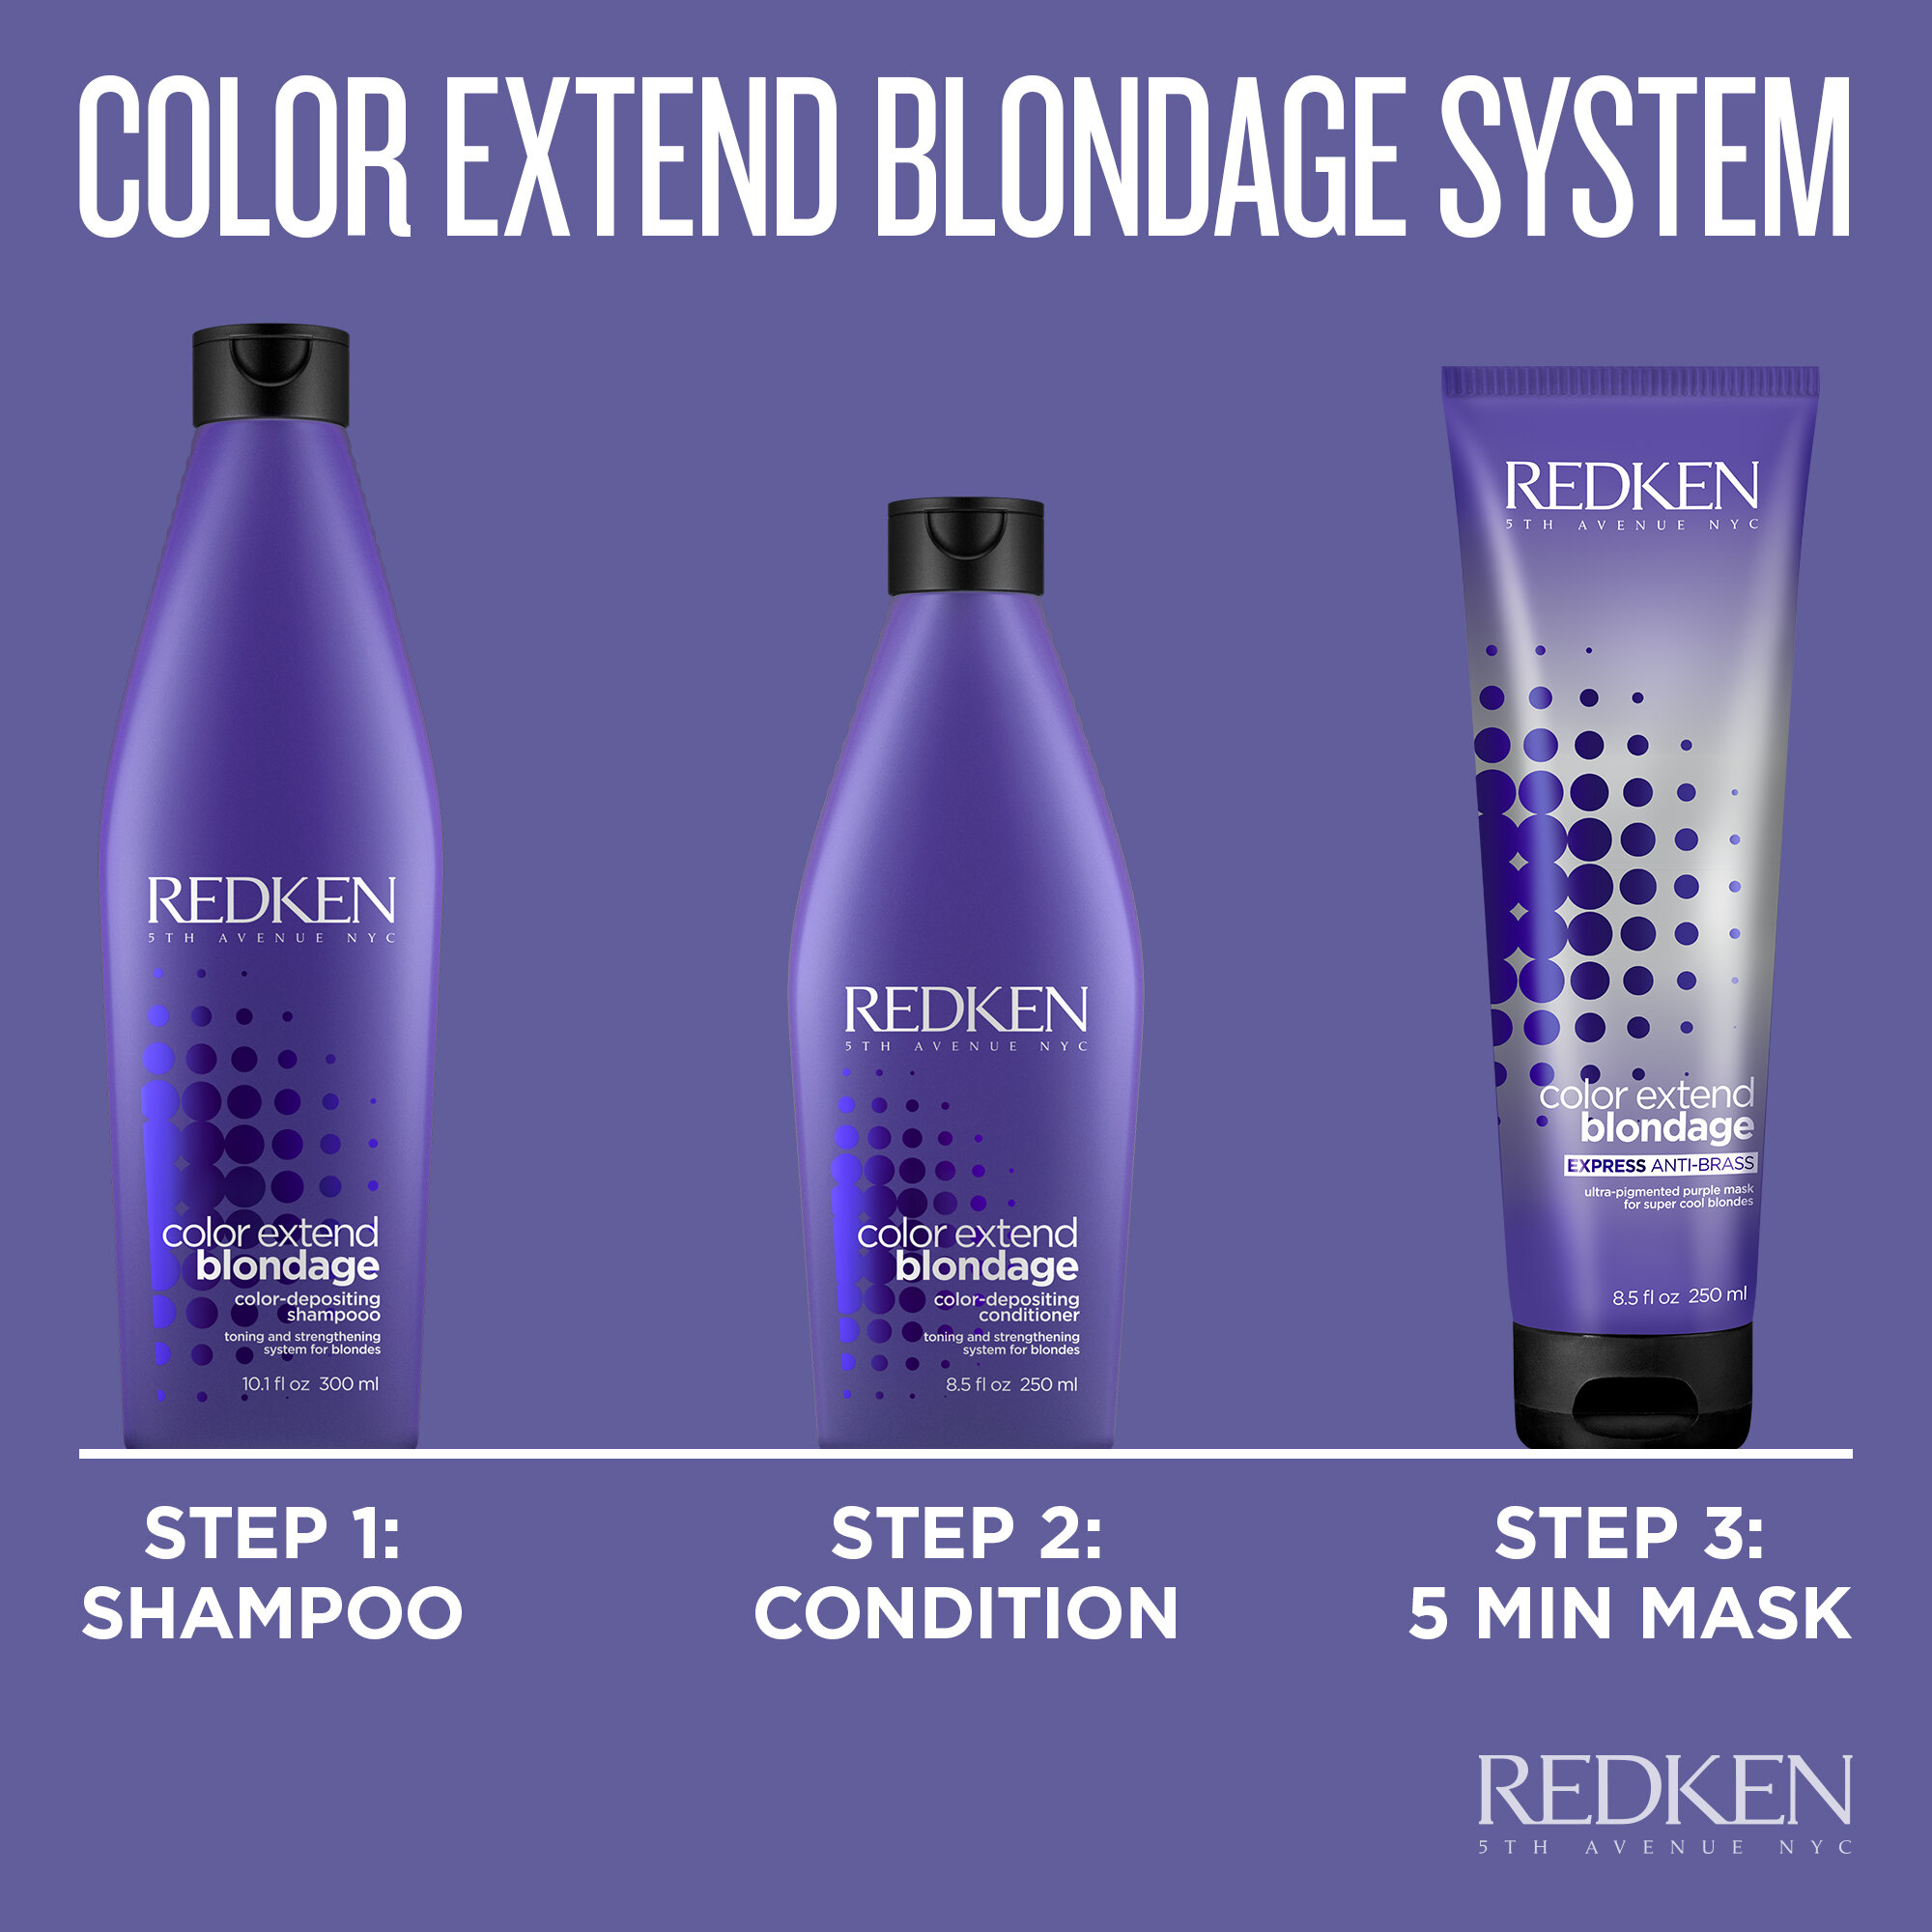 Redken-2020-US-Amazon-Launch-Step-By-Step-Template-V6-2000x2000.jpg